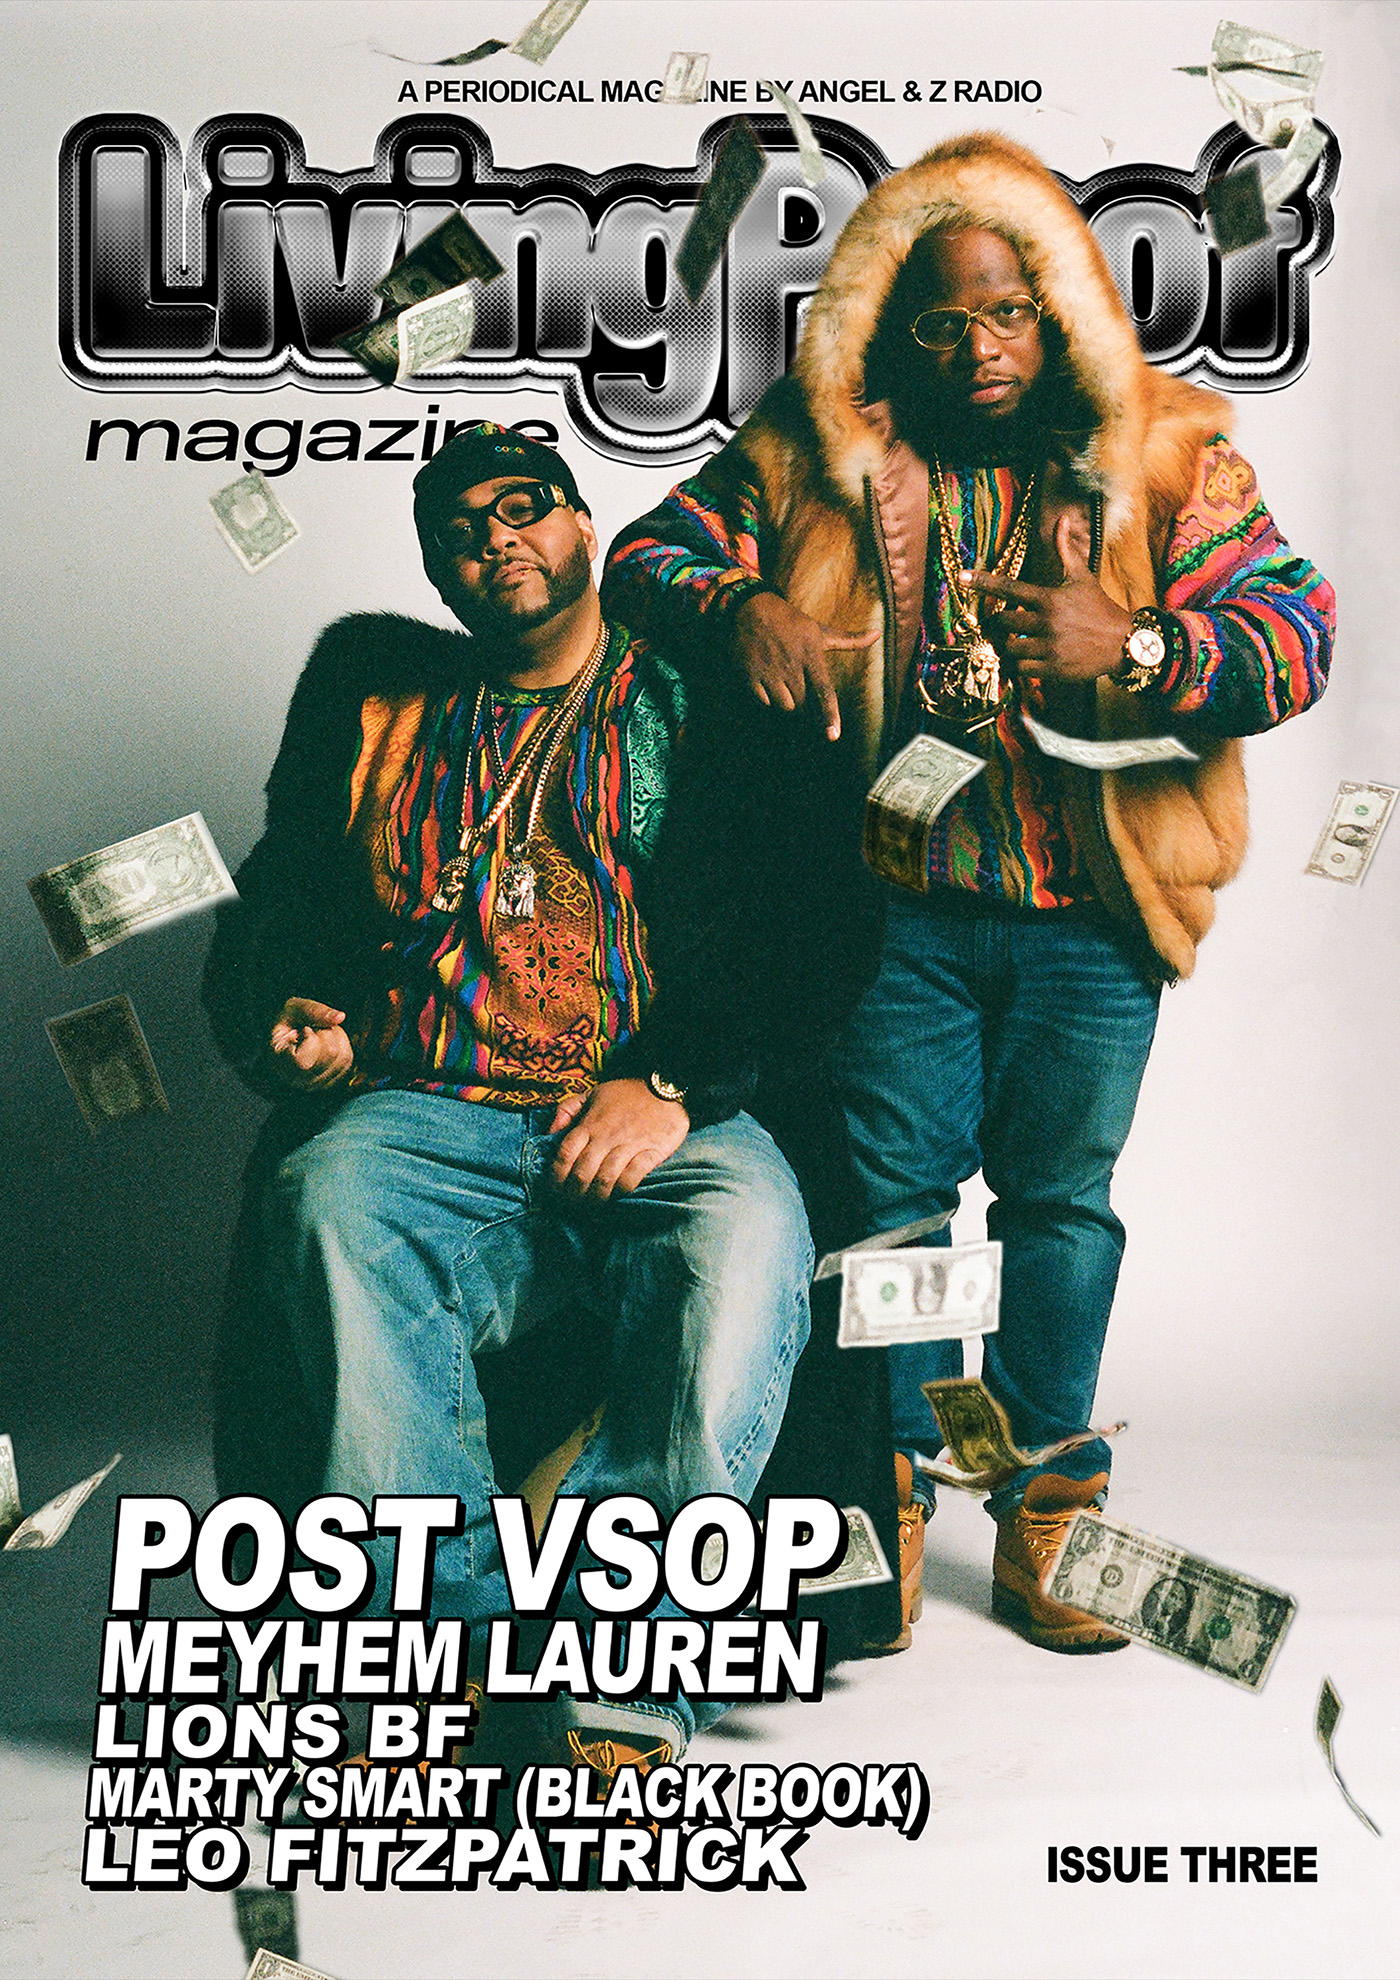 Living Proof Magazine Issue Three featuring Post VSOP, Mayhem Lauren, Lions BF, Marty Smart Crew, and Leo Fitzpatrick.